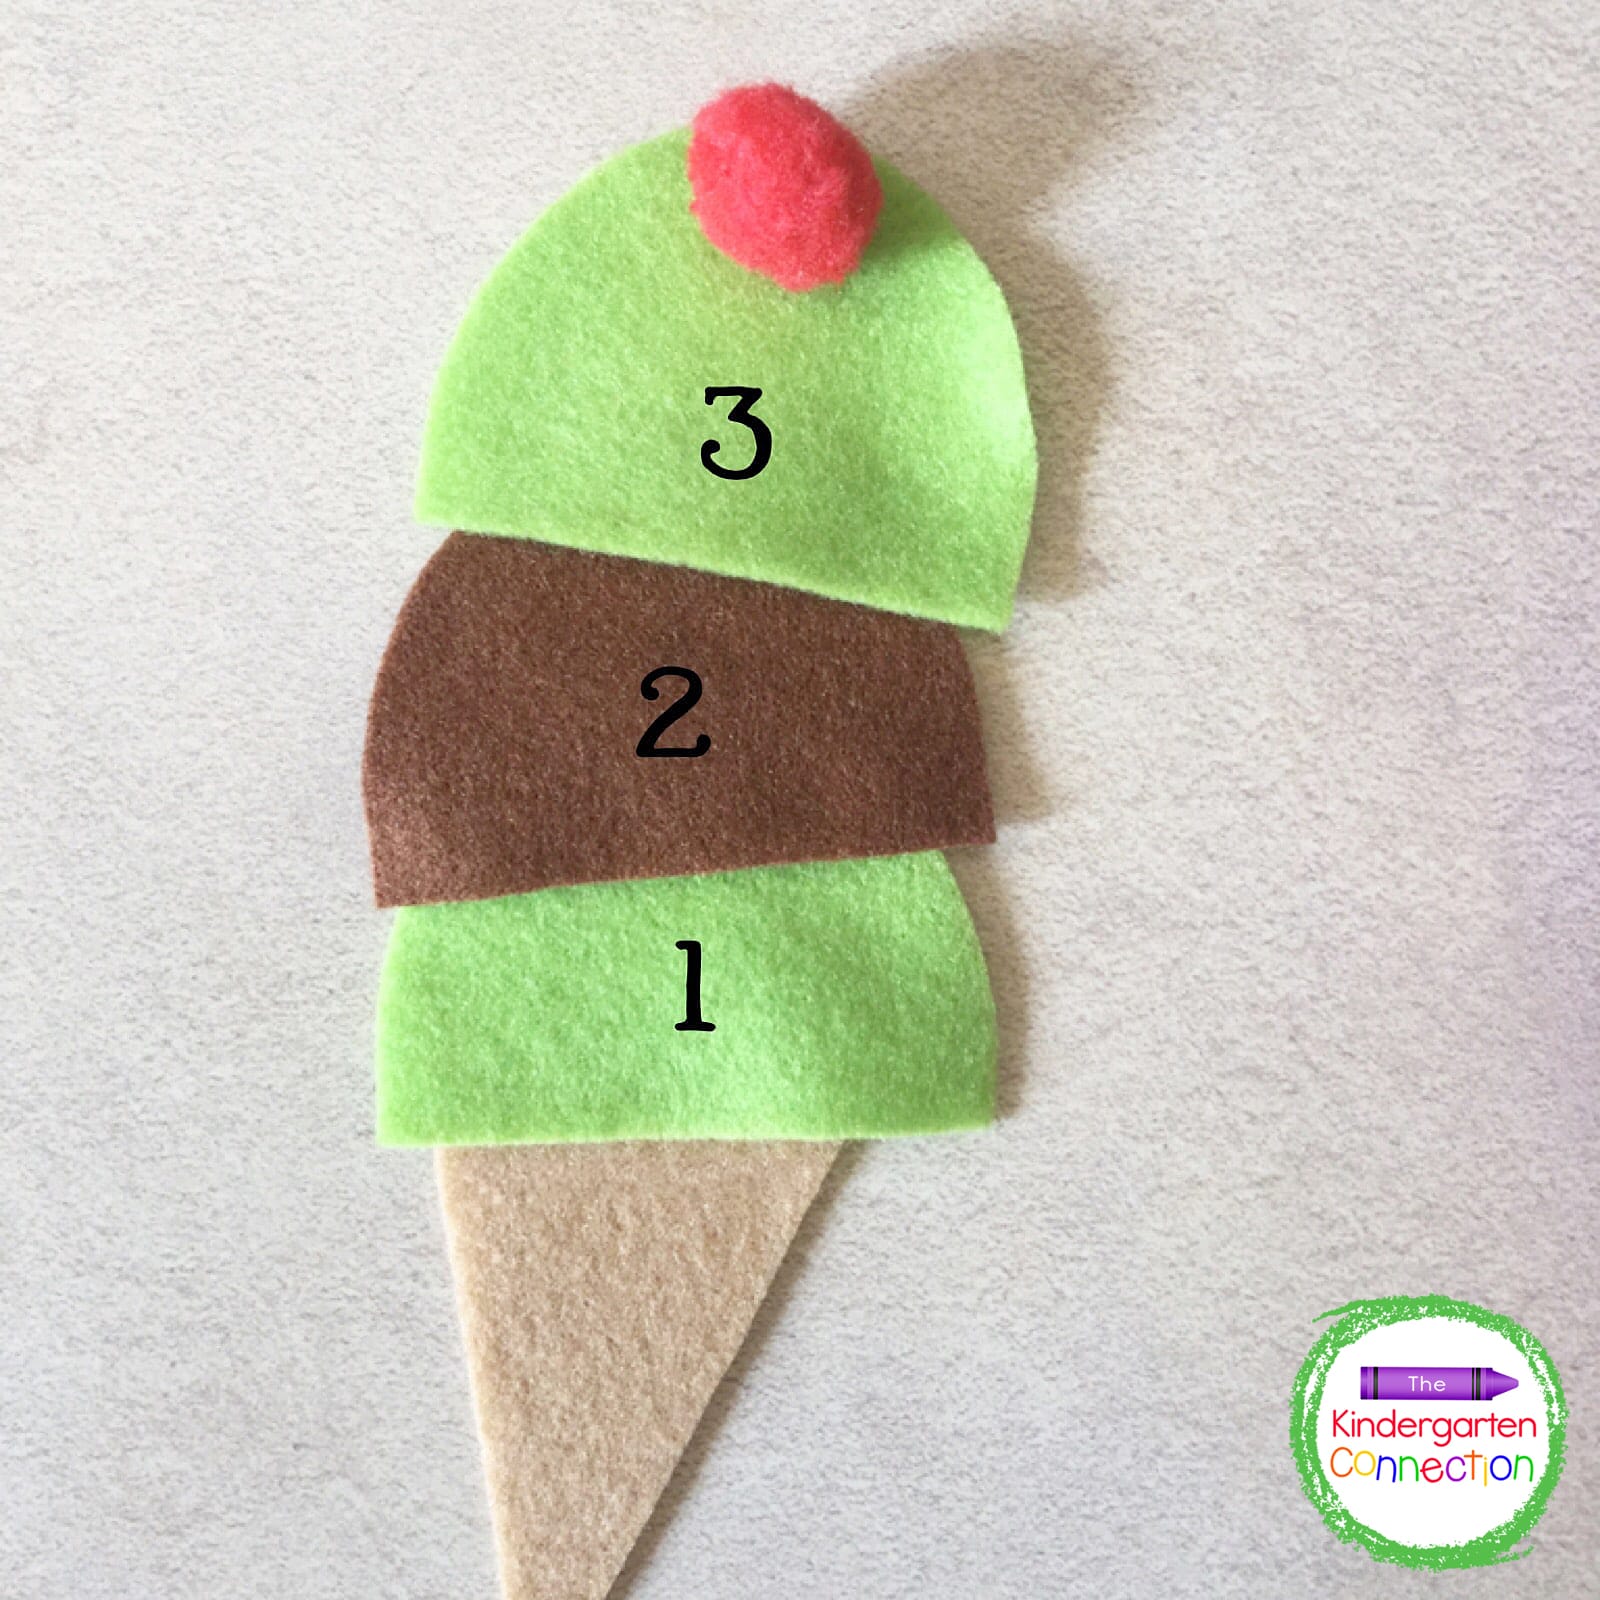 Ask kids to build ice cream cones with a specific number of scoops to practice counting skills.